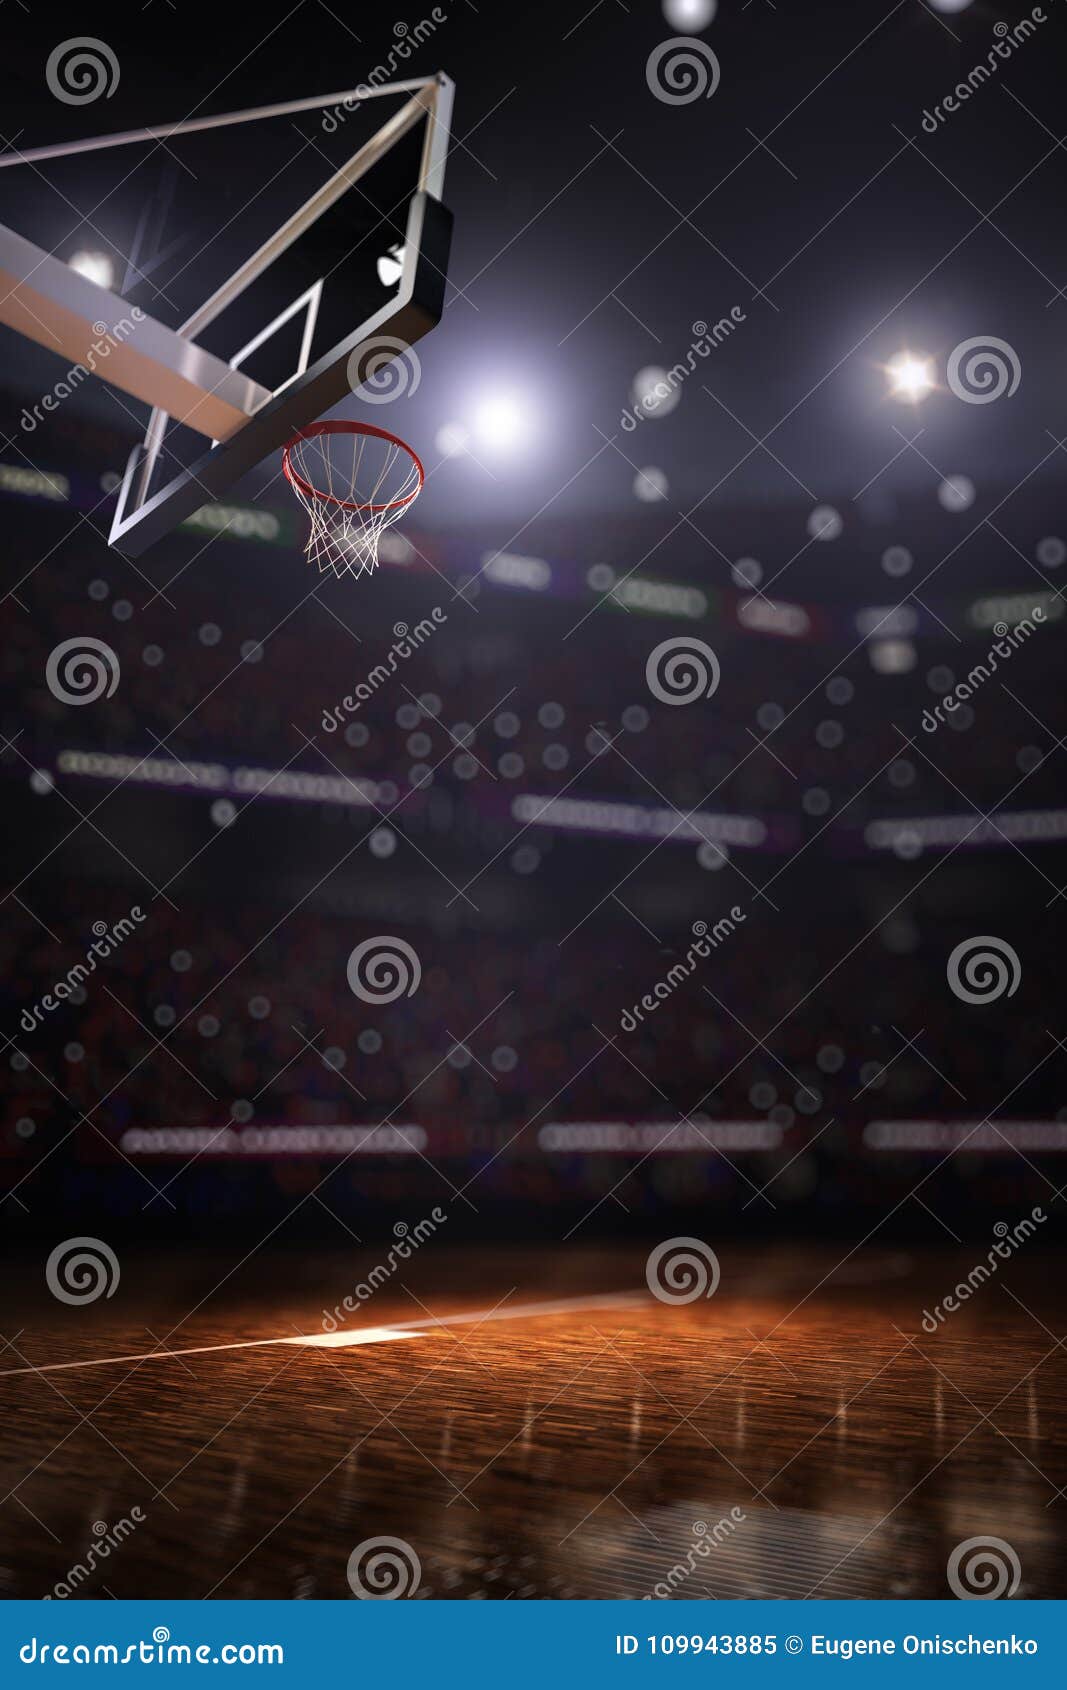 basketball court with people fan 3d render background